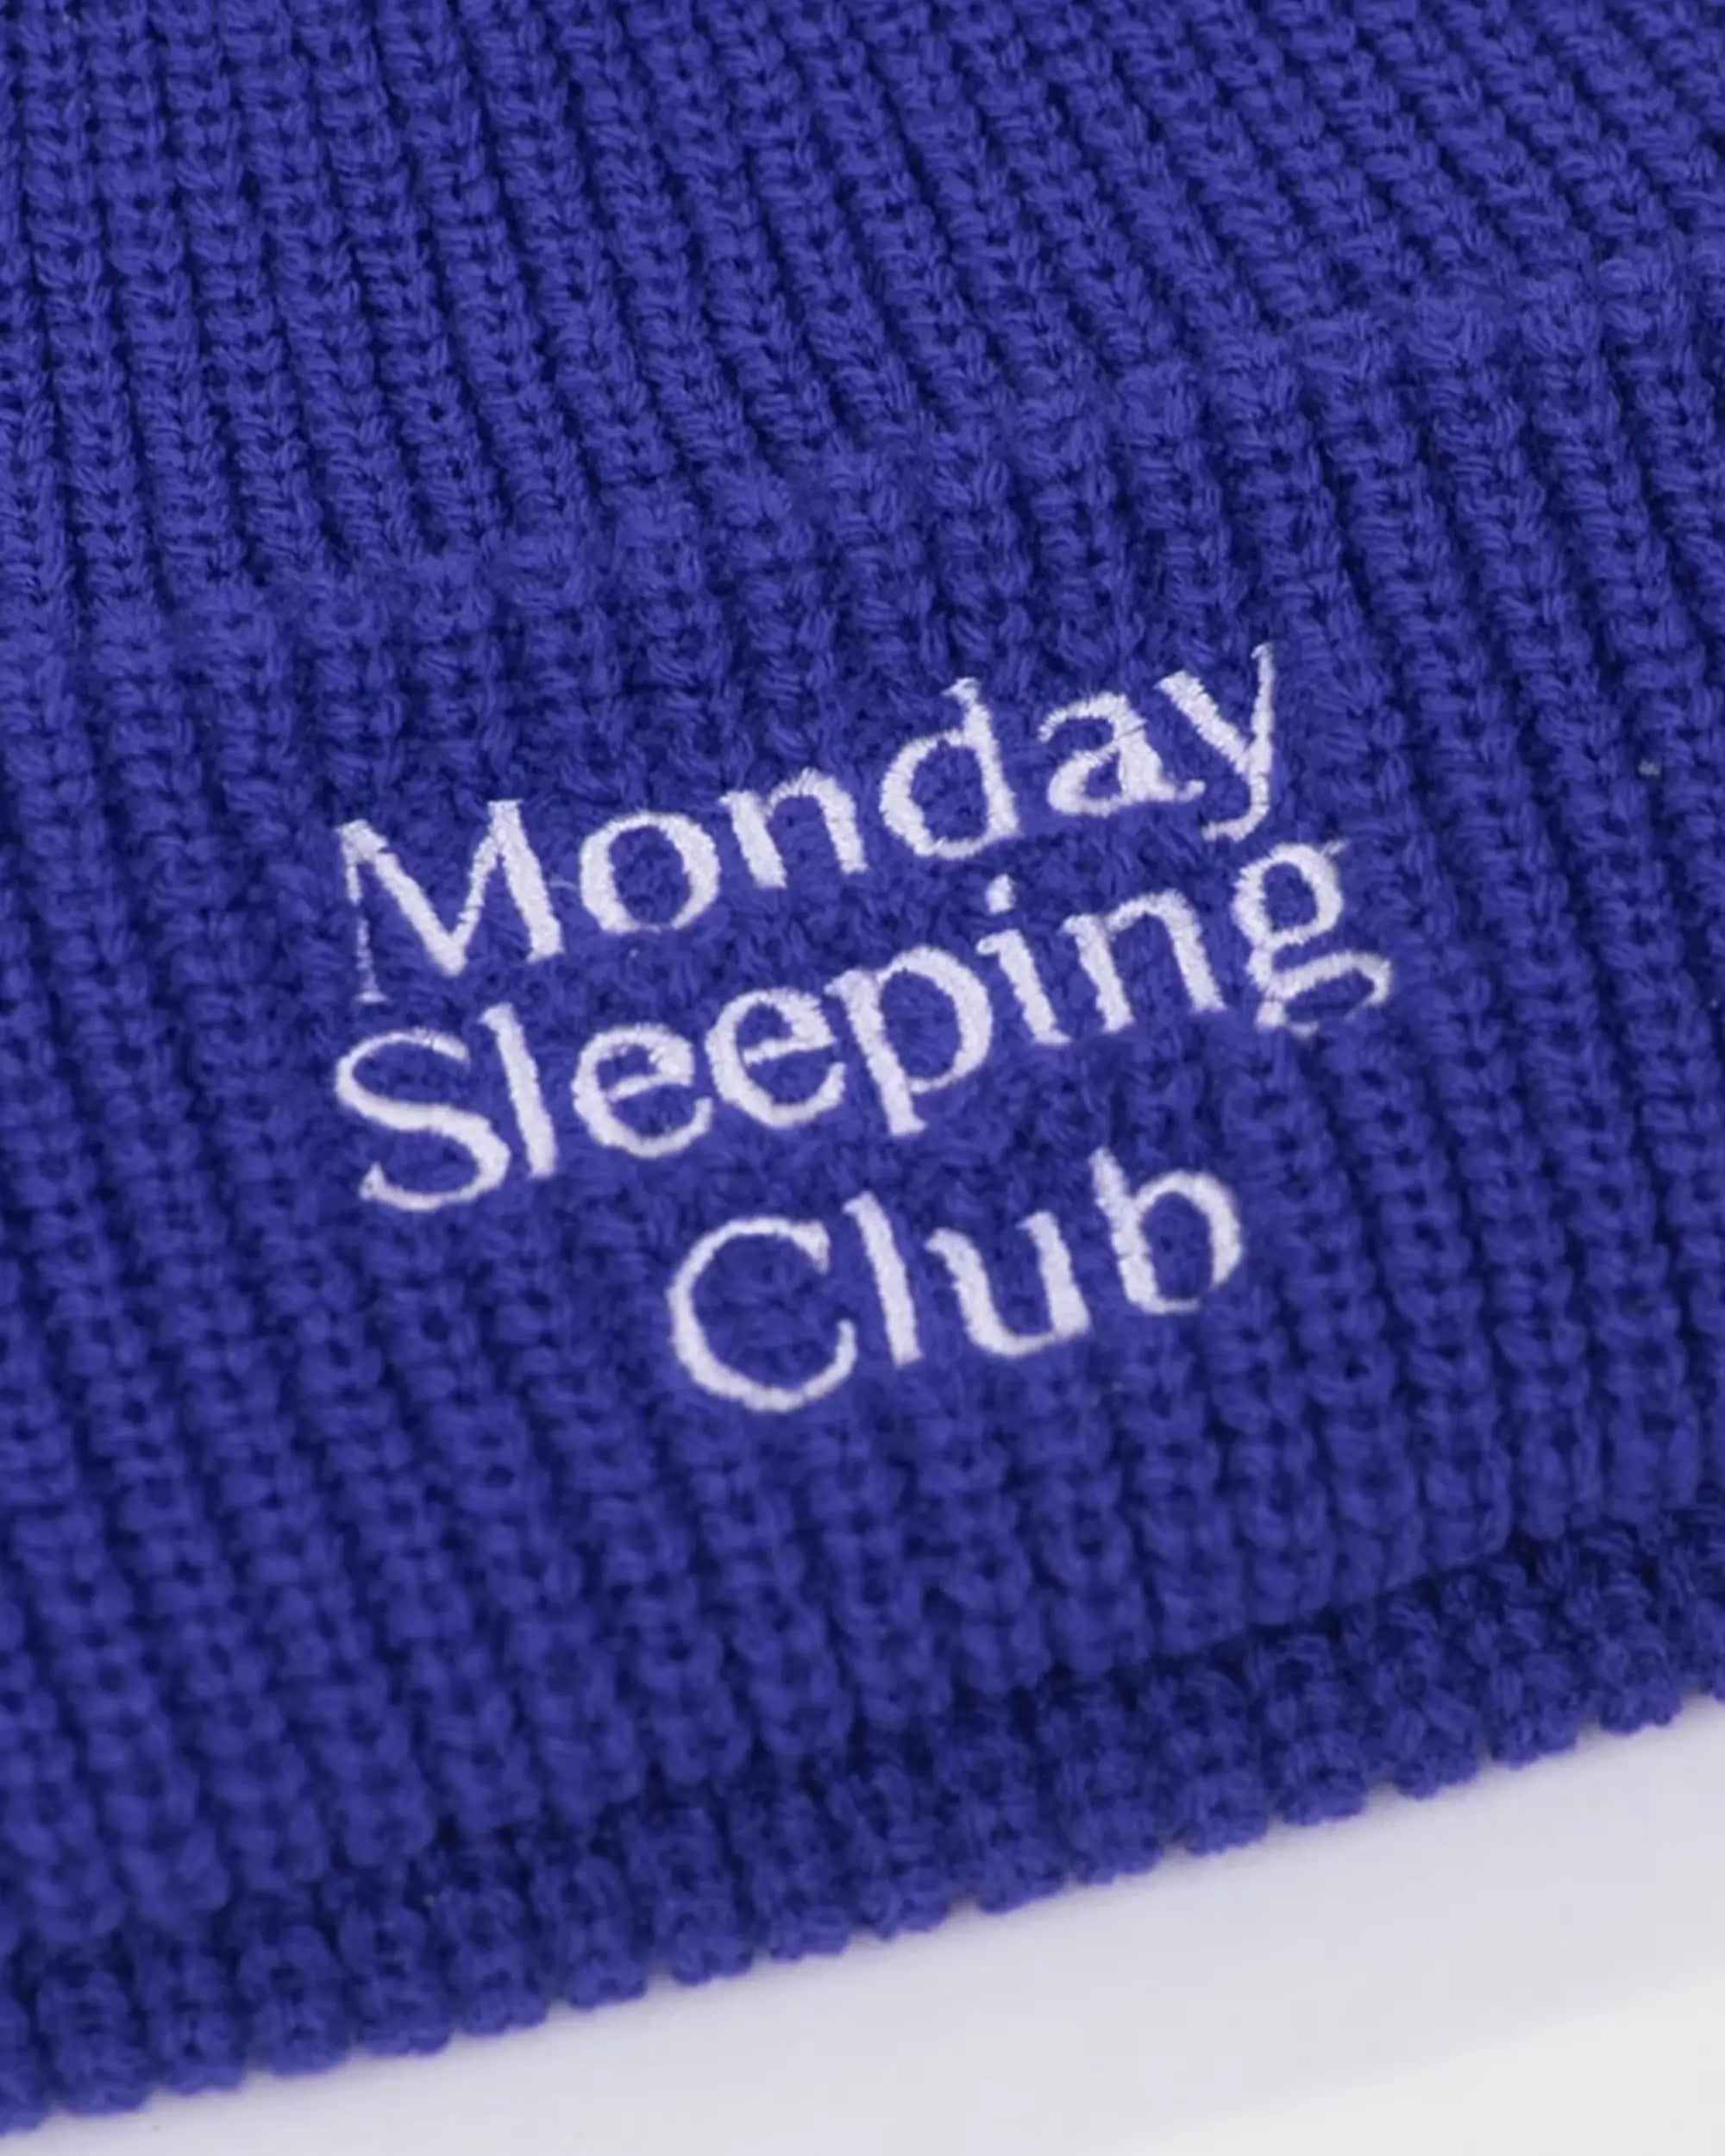 Monday Sleeping Club Standard Font Embroidered Logo Knitted Beanie